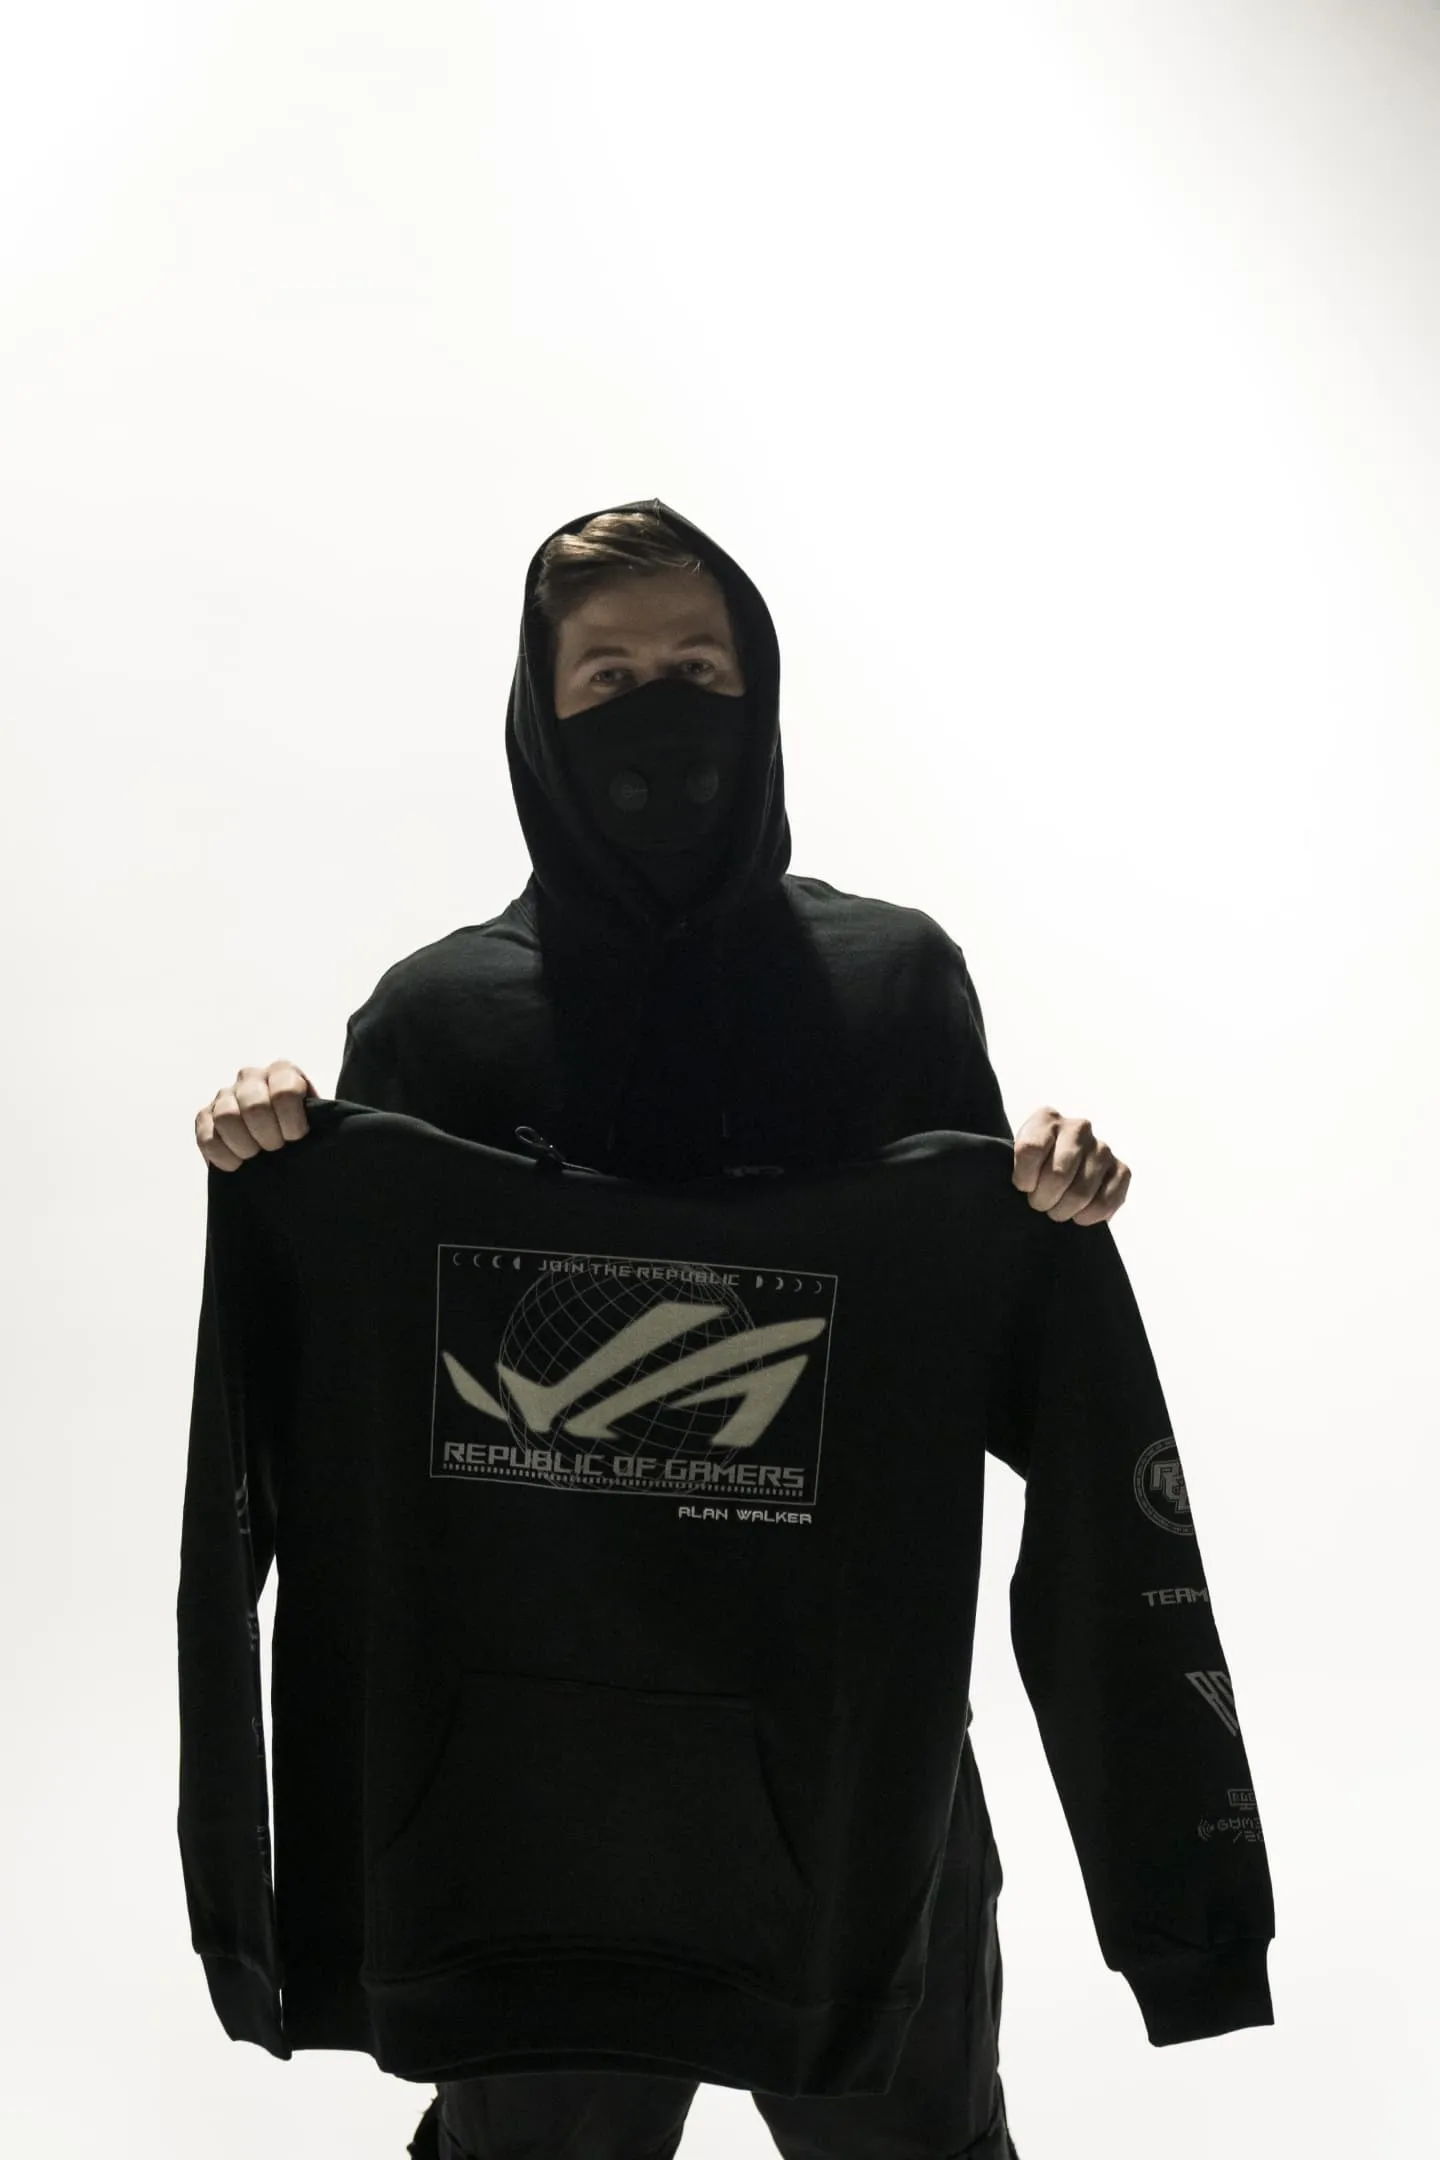 Alan Walker in front of a white background, showing off an ROG hoodie for the camera.